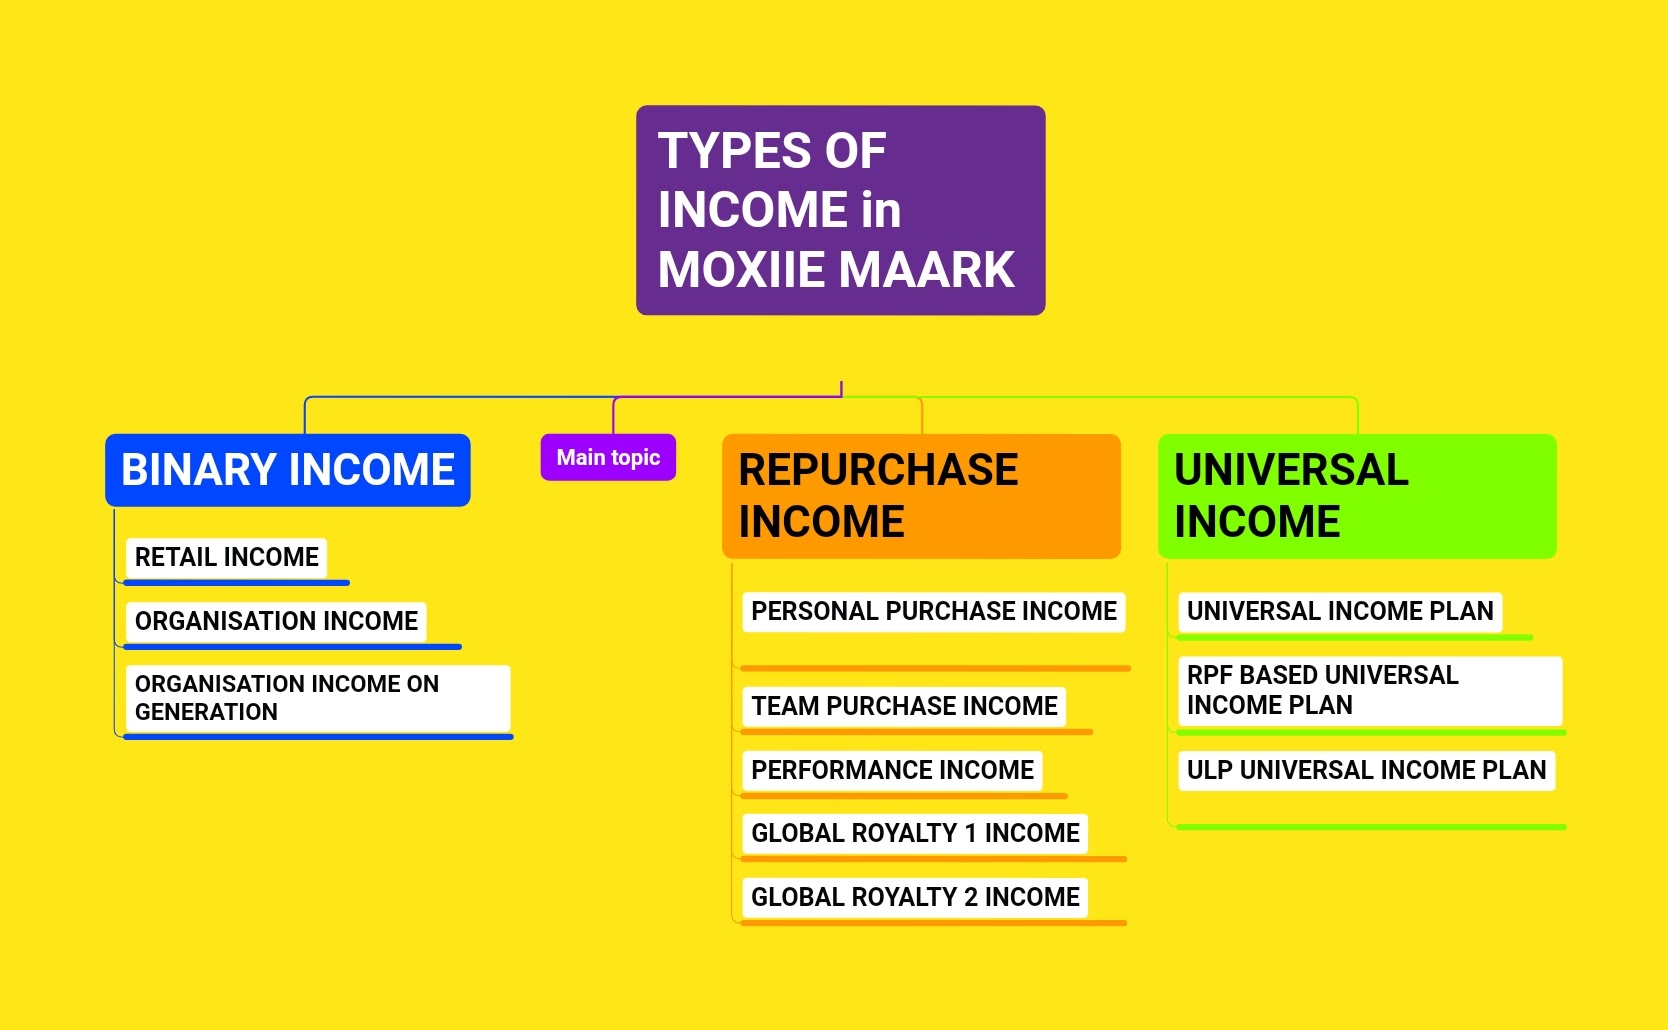 Types of income